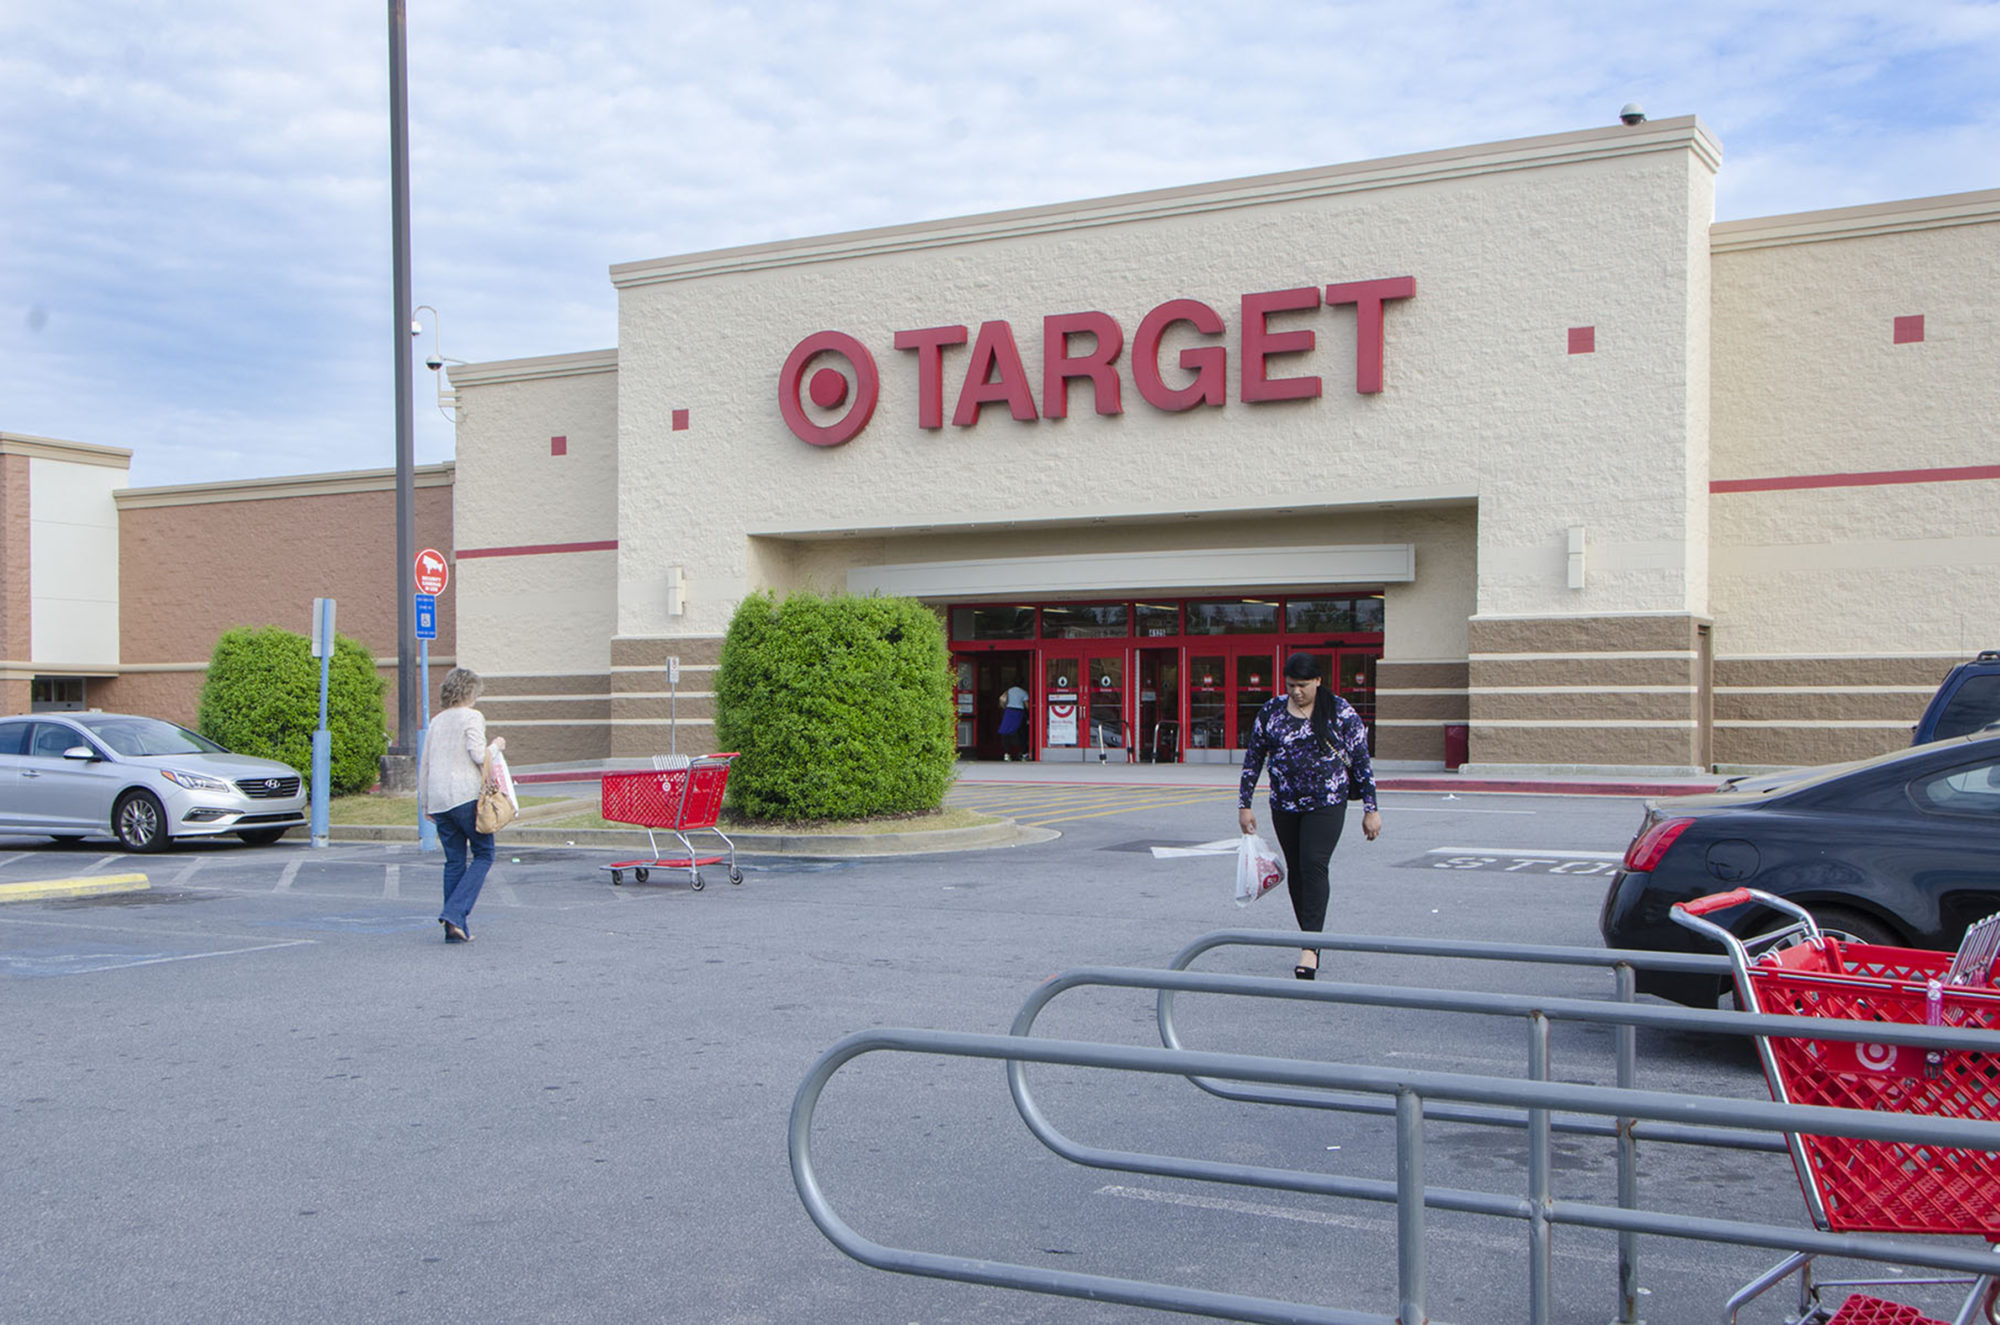 A woman leaves Target with a grocery bag